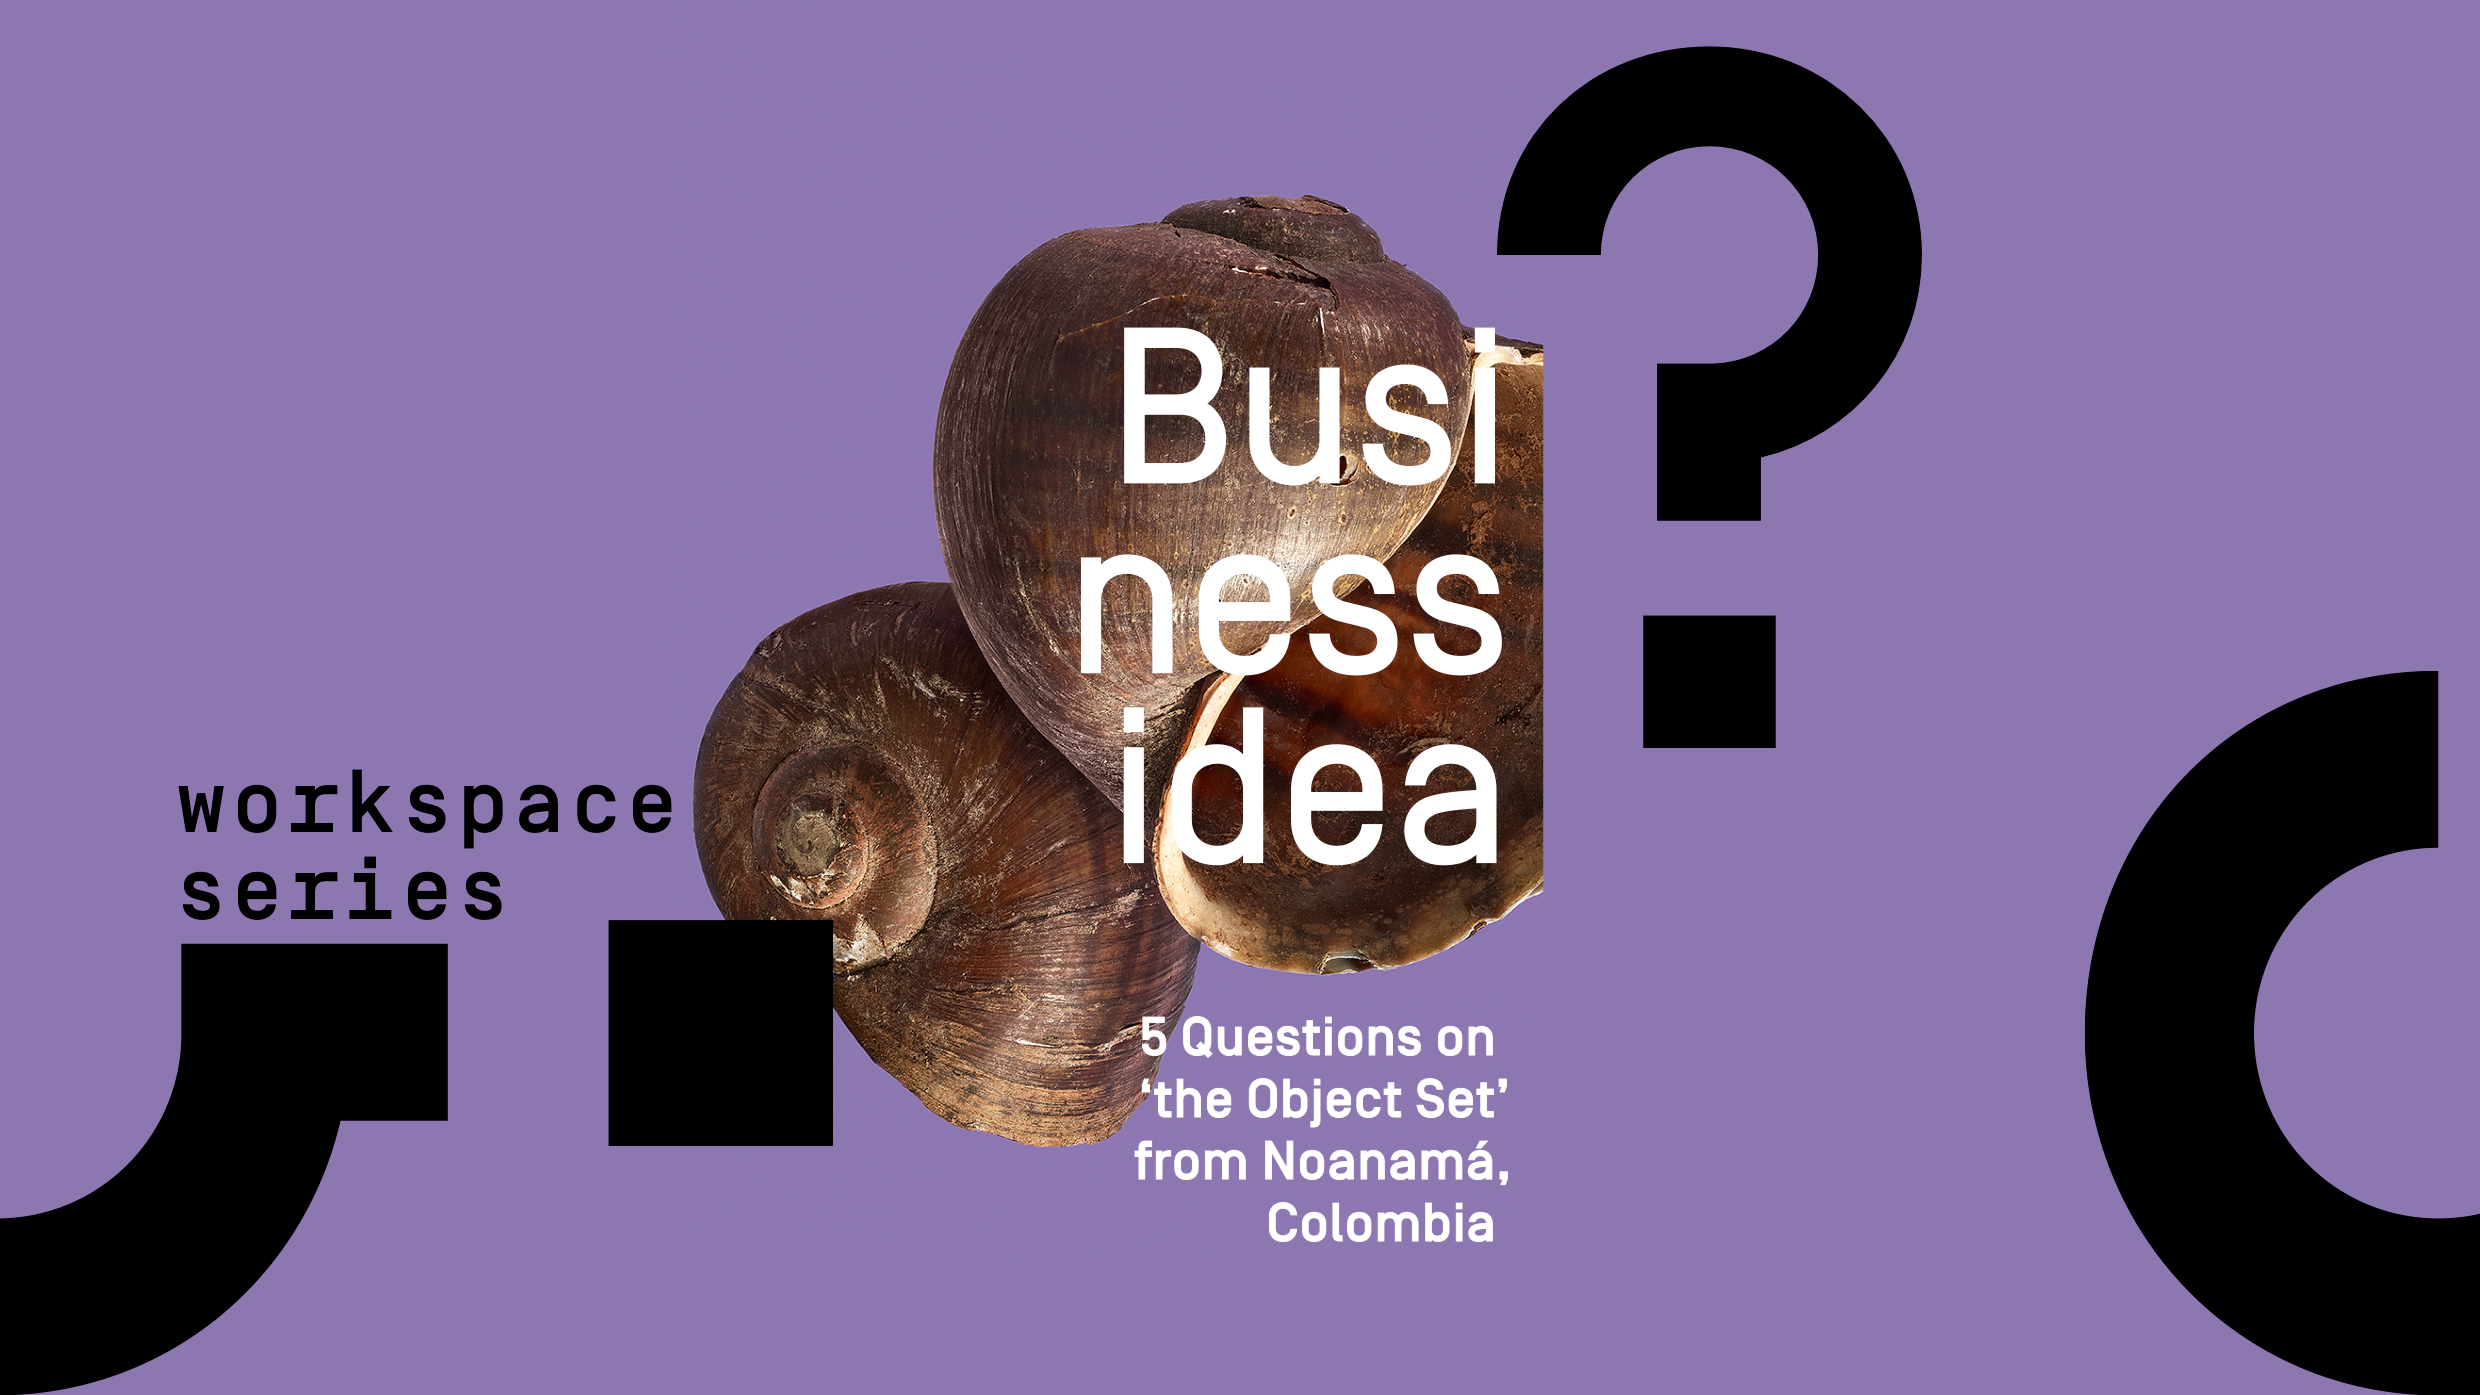 Business idea? 5 Questions on ‘the object set’ from Noanamá, Colombia